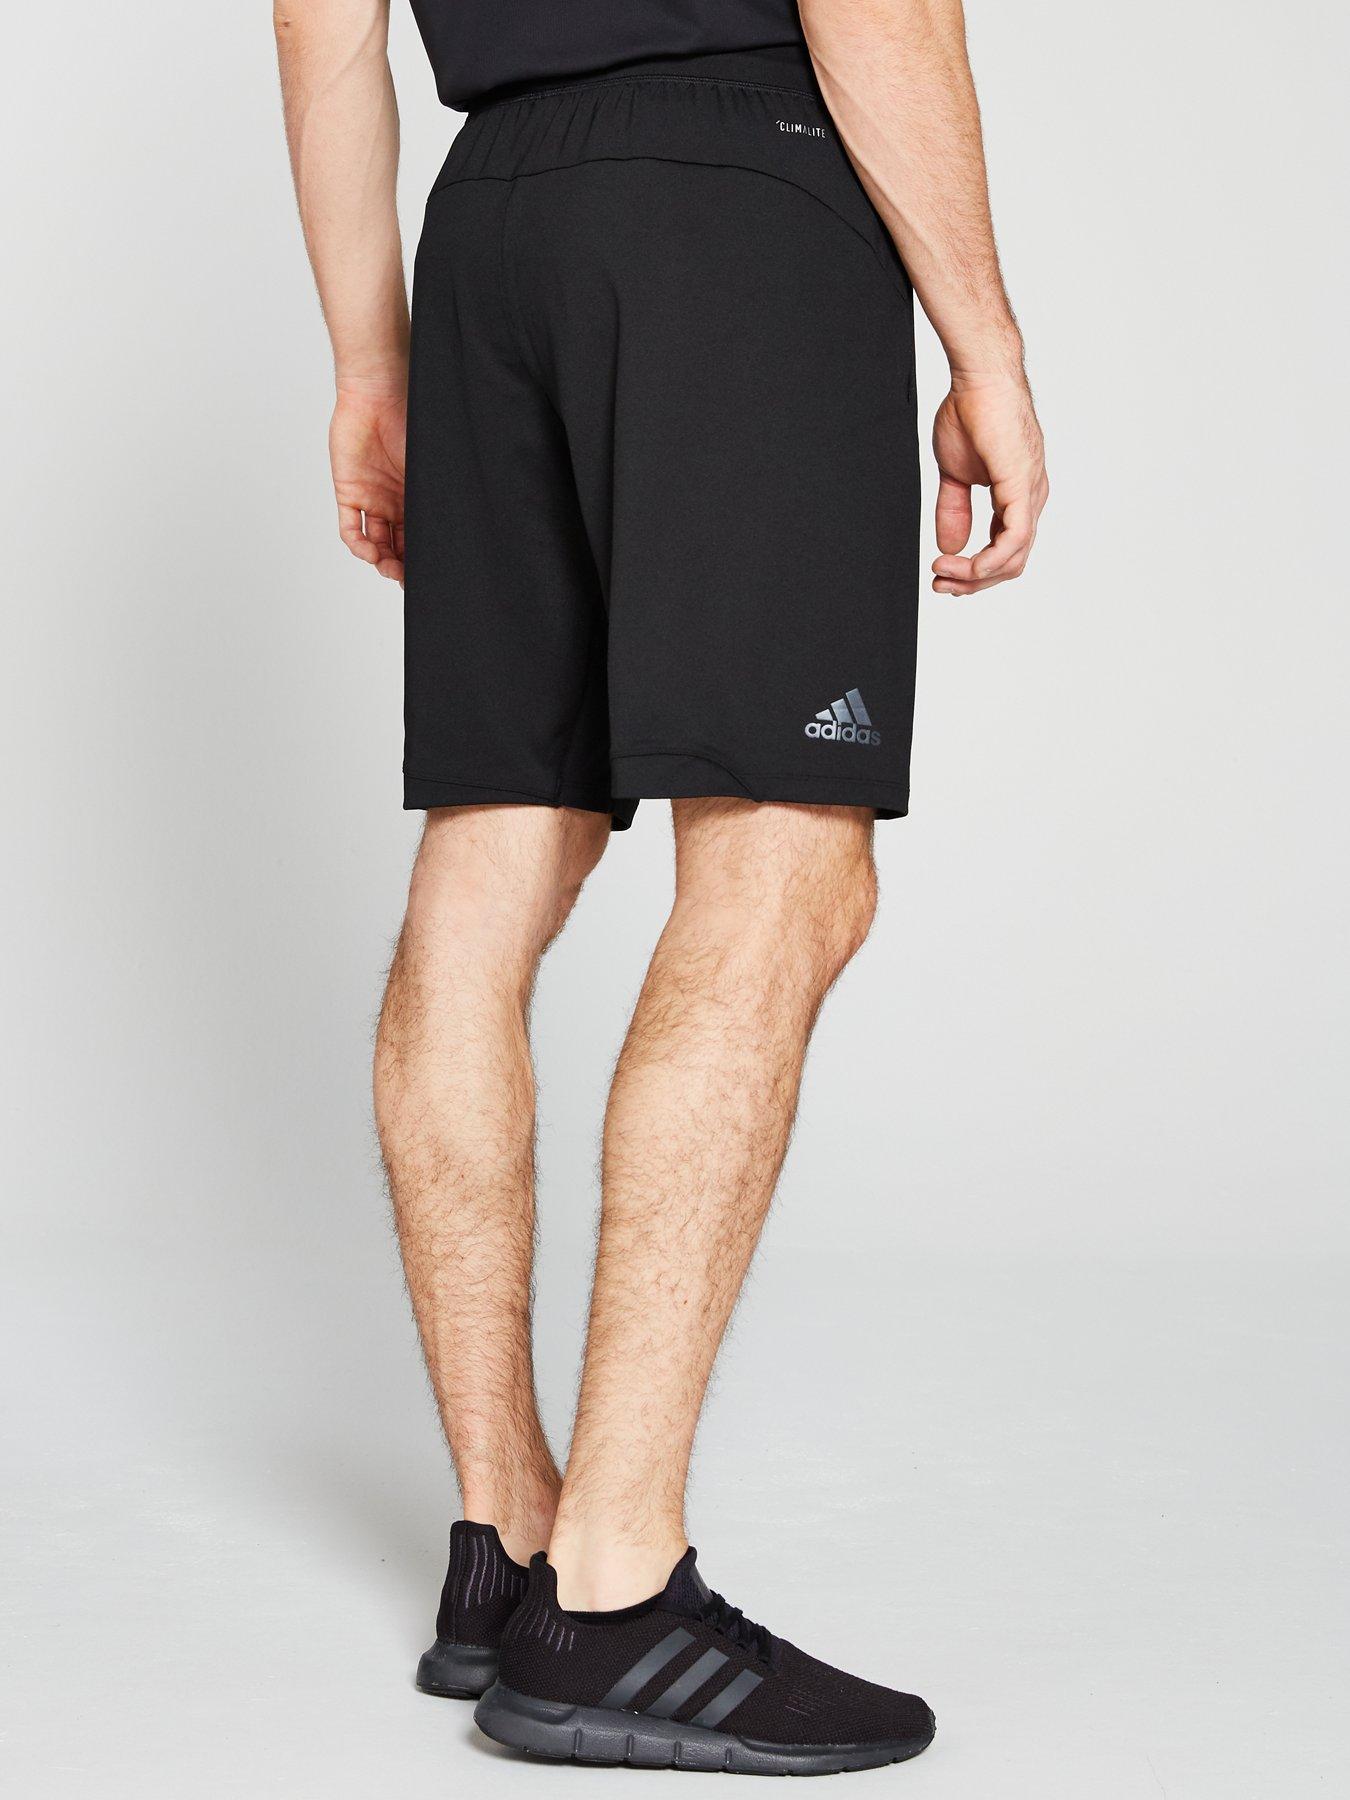 what is adidas short for